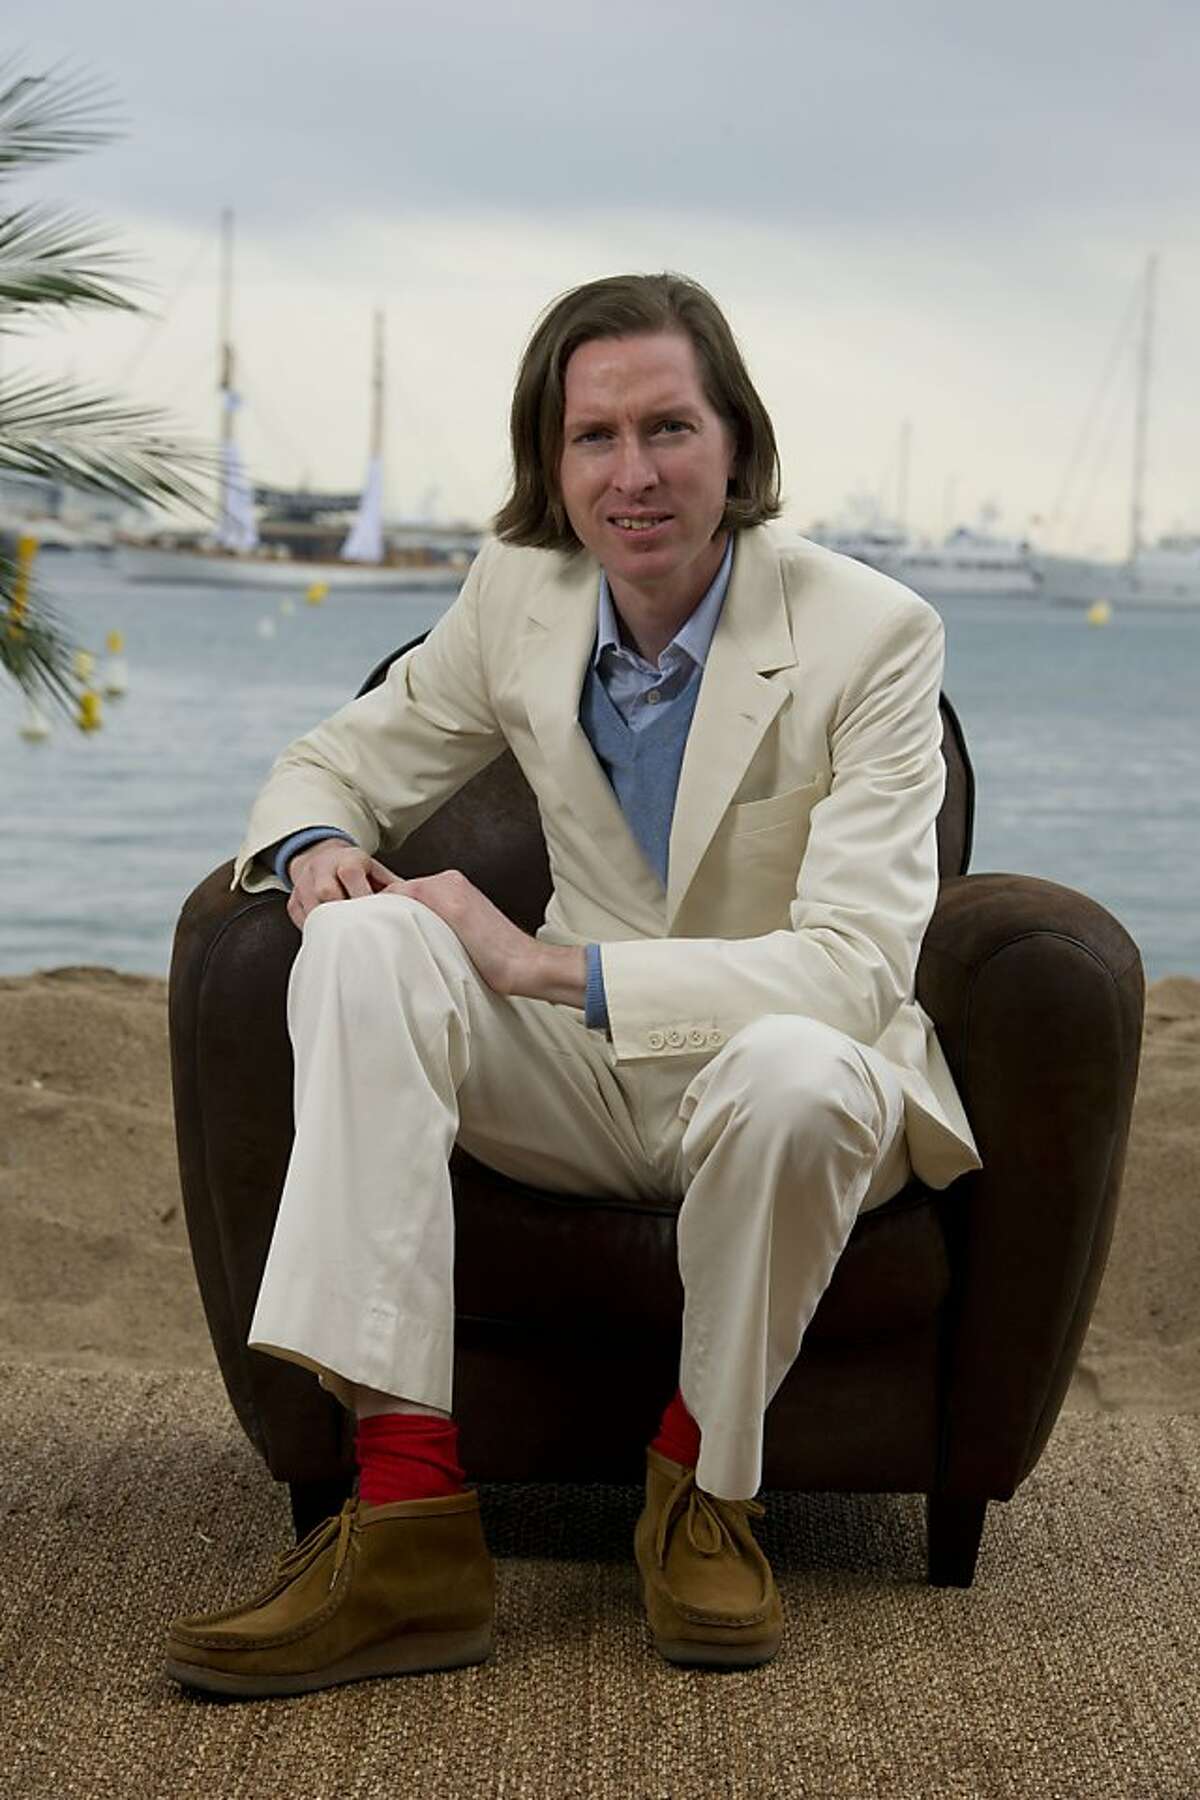 Director Wes Anderson poses for a portrait to promote his film Moonrise Kingdom at the 65th international film festival, in Cannes, southern France, Friday, May 18, 2012. (AP Photo/Jonathan Short)